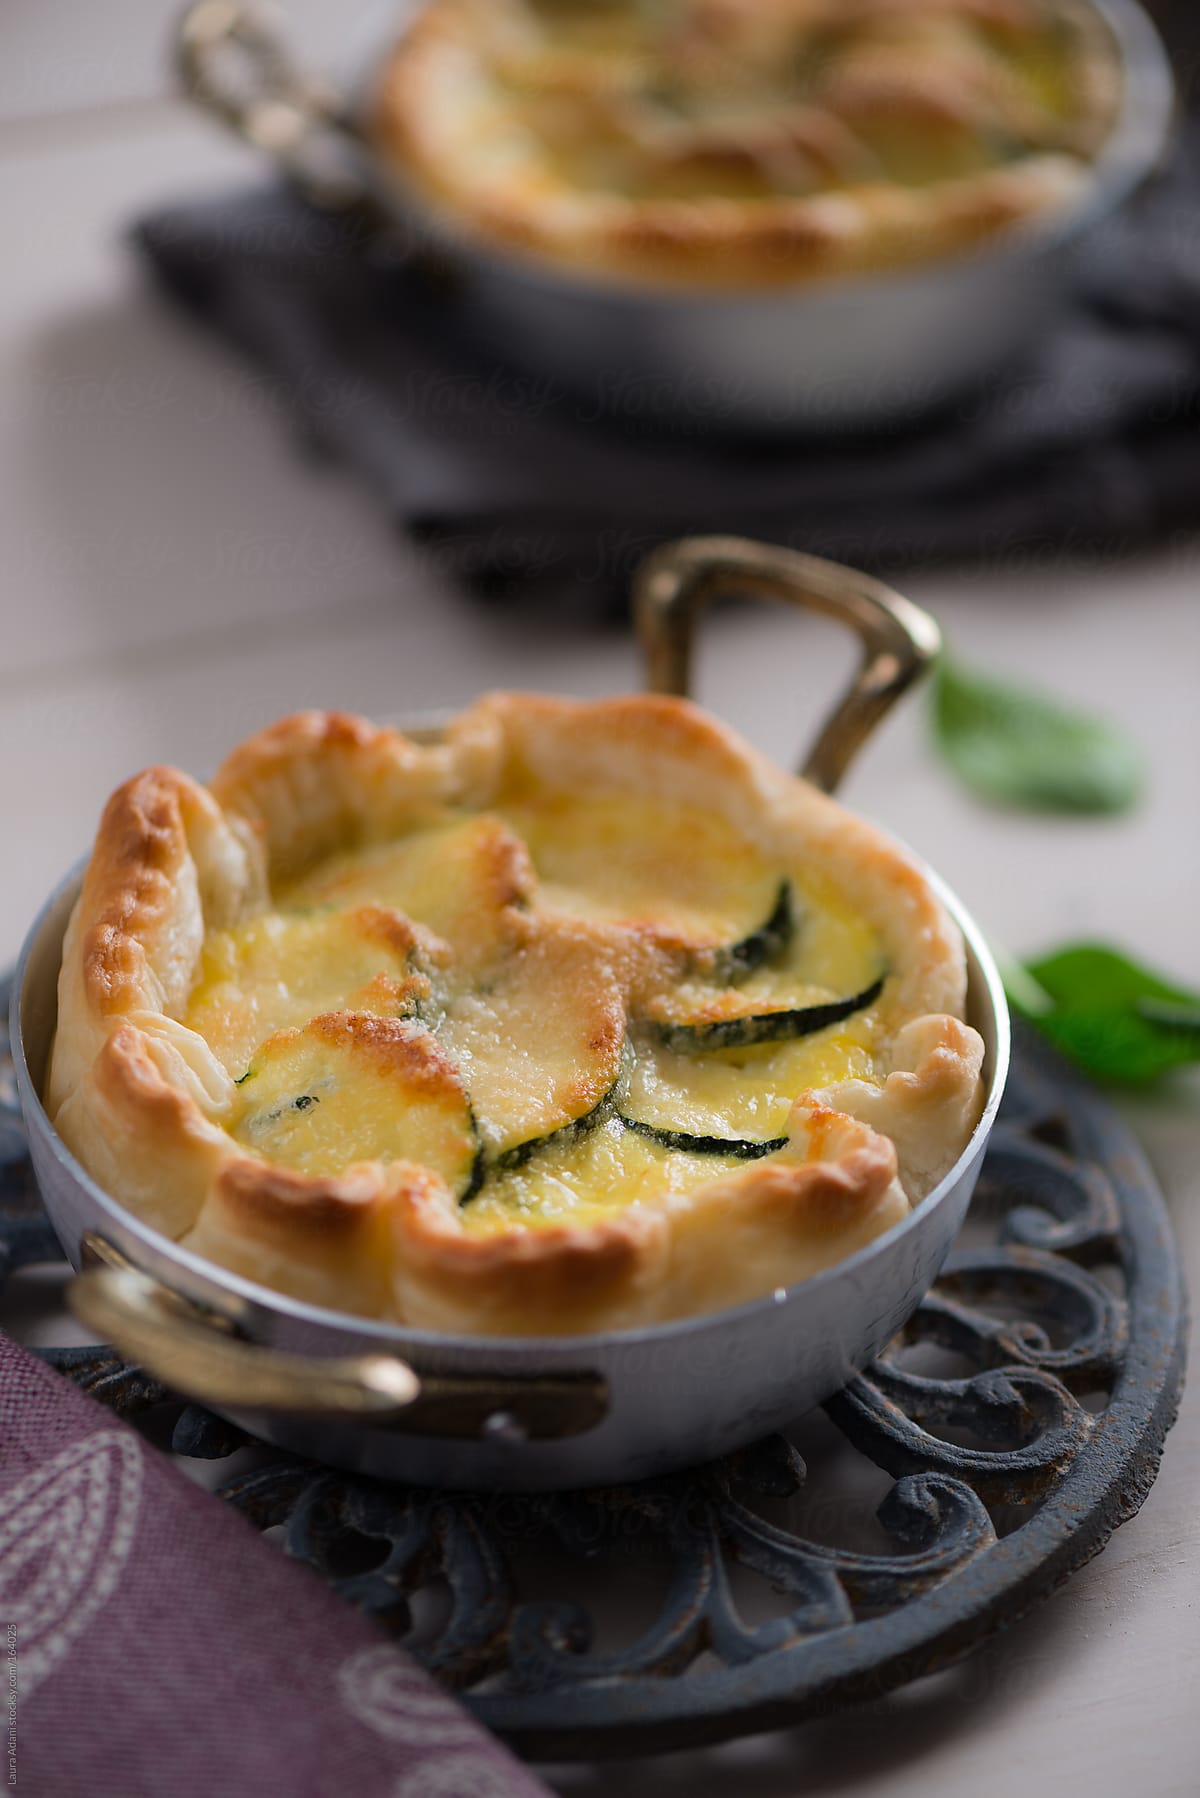 a courgette pie with eggs and cheese in a crust of pastry